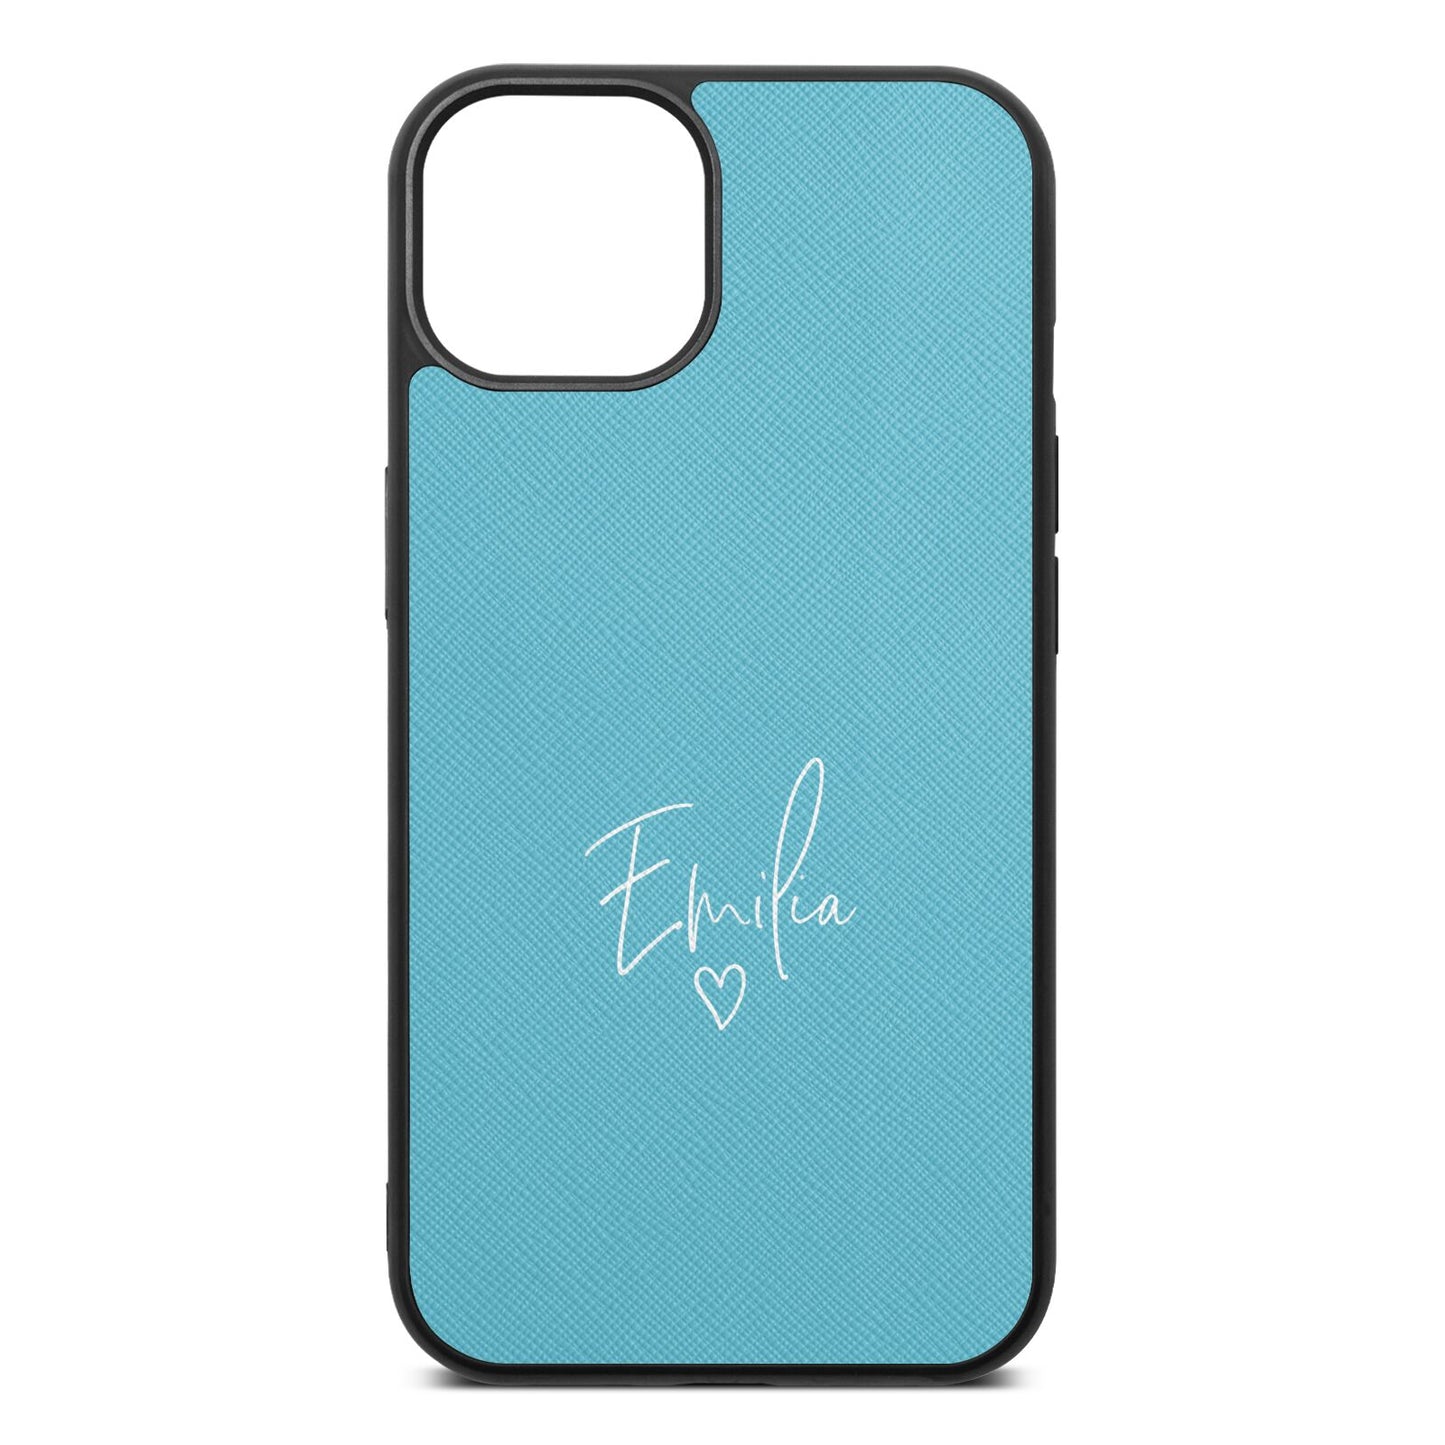 White Handwritten Name Transparent Sky Saffiano Leather iPhone 13 Case